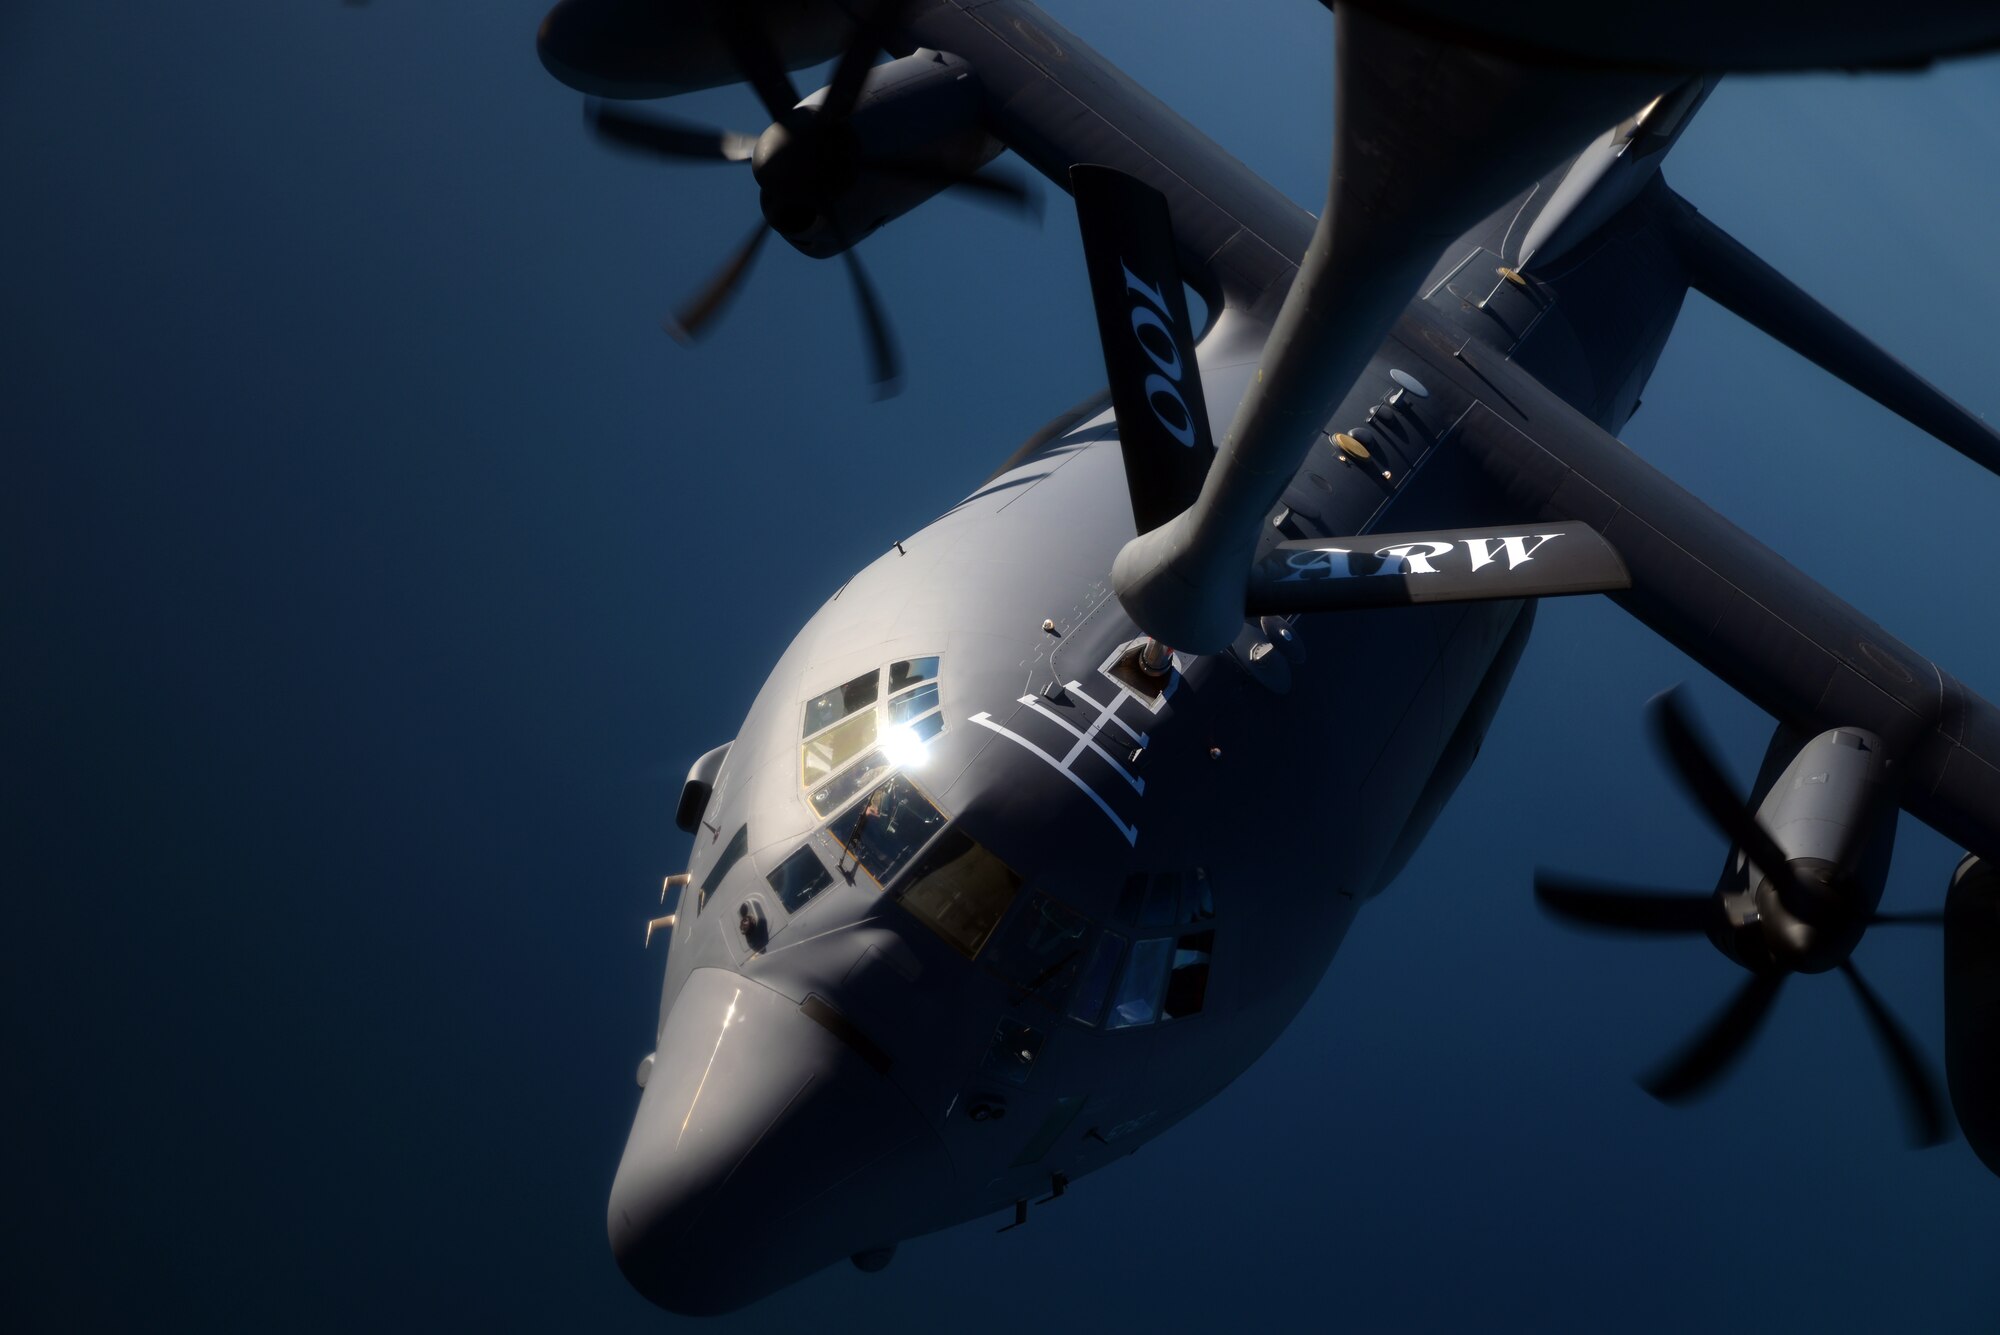 A U.S. Air Force MC-130J Commando II from RAF Mildenhall, England, receives fuel from a KC-135 Stratotanker from RAF Mildenhall, England, Oct. 22, 2015, over the Atlantic Ocean. The two aircraft were training in exercise Trident Juncture, an exercise designed to help militaries respond more effectively to regional crises with NATO allies and partners – improving security of borders, ensuring energy security and countering threats of terrorism. (U.S. Air Force photo by Senior Airman Christine Halan/Released)